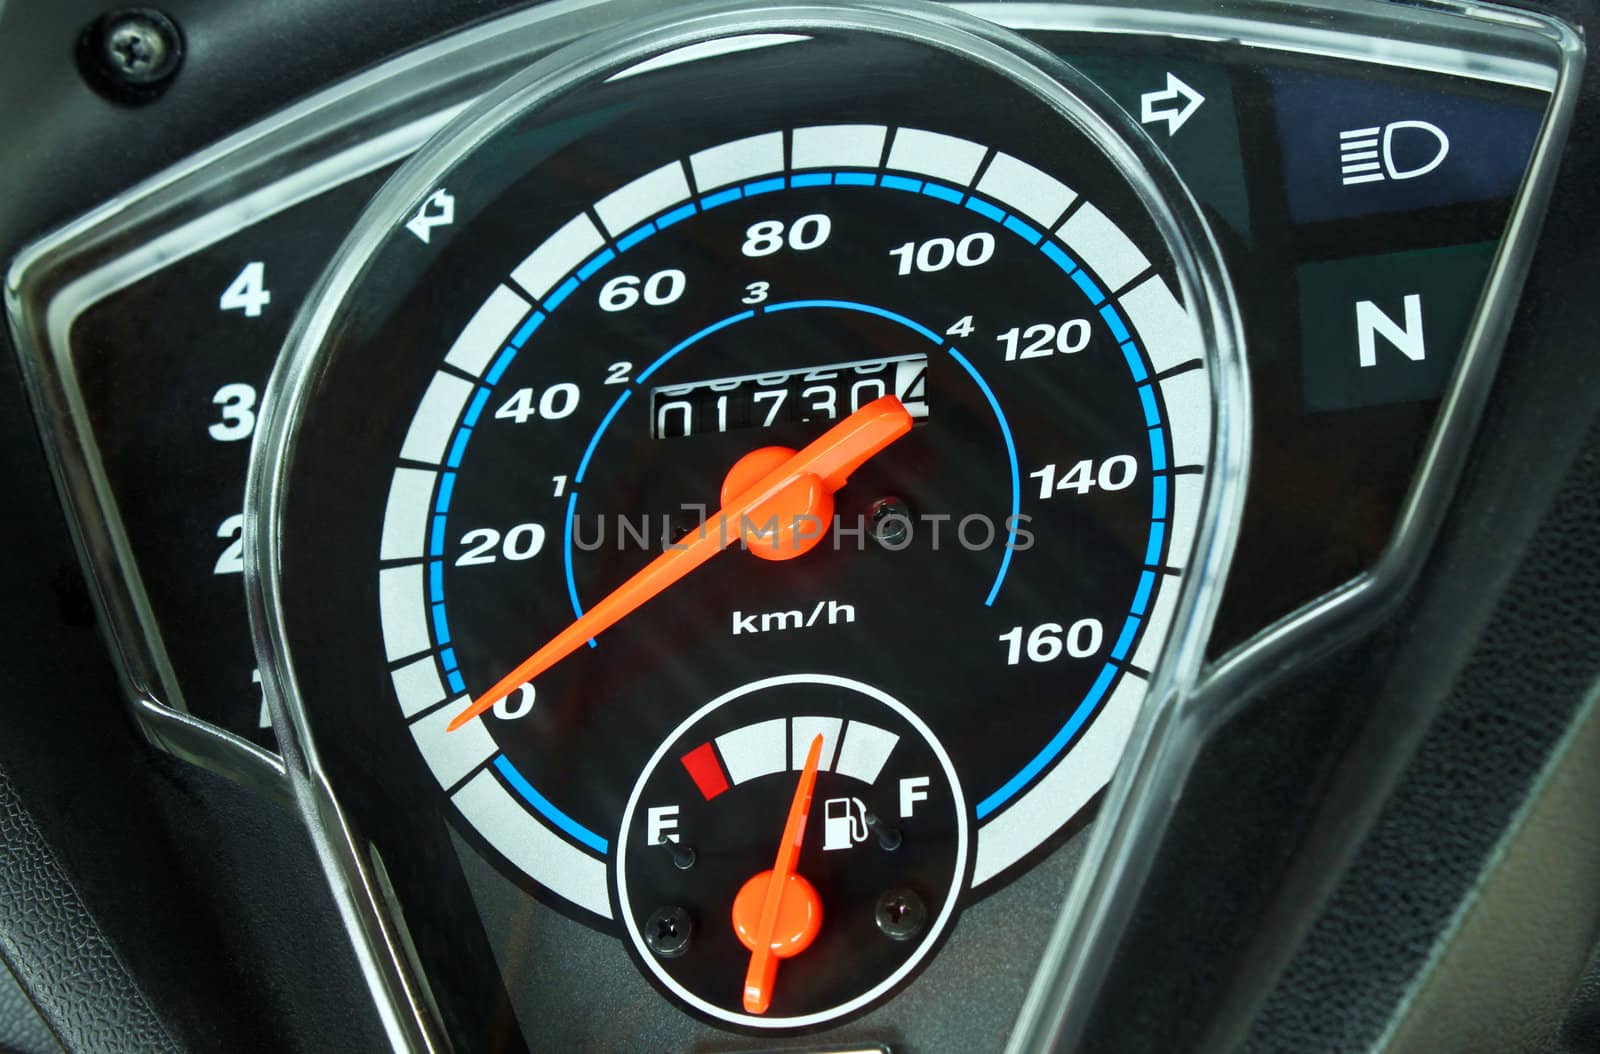 Motorcycle speed meter, fuel gauge and other indicators for travel